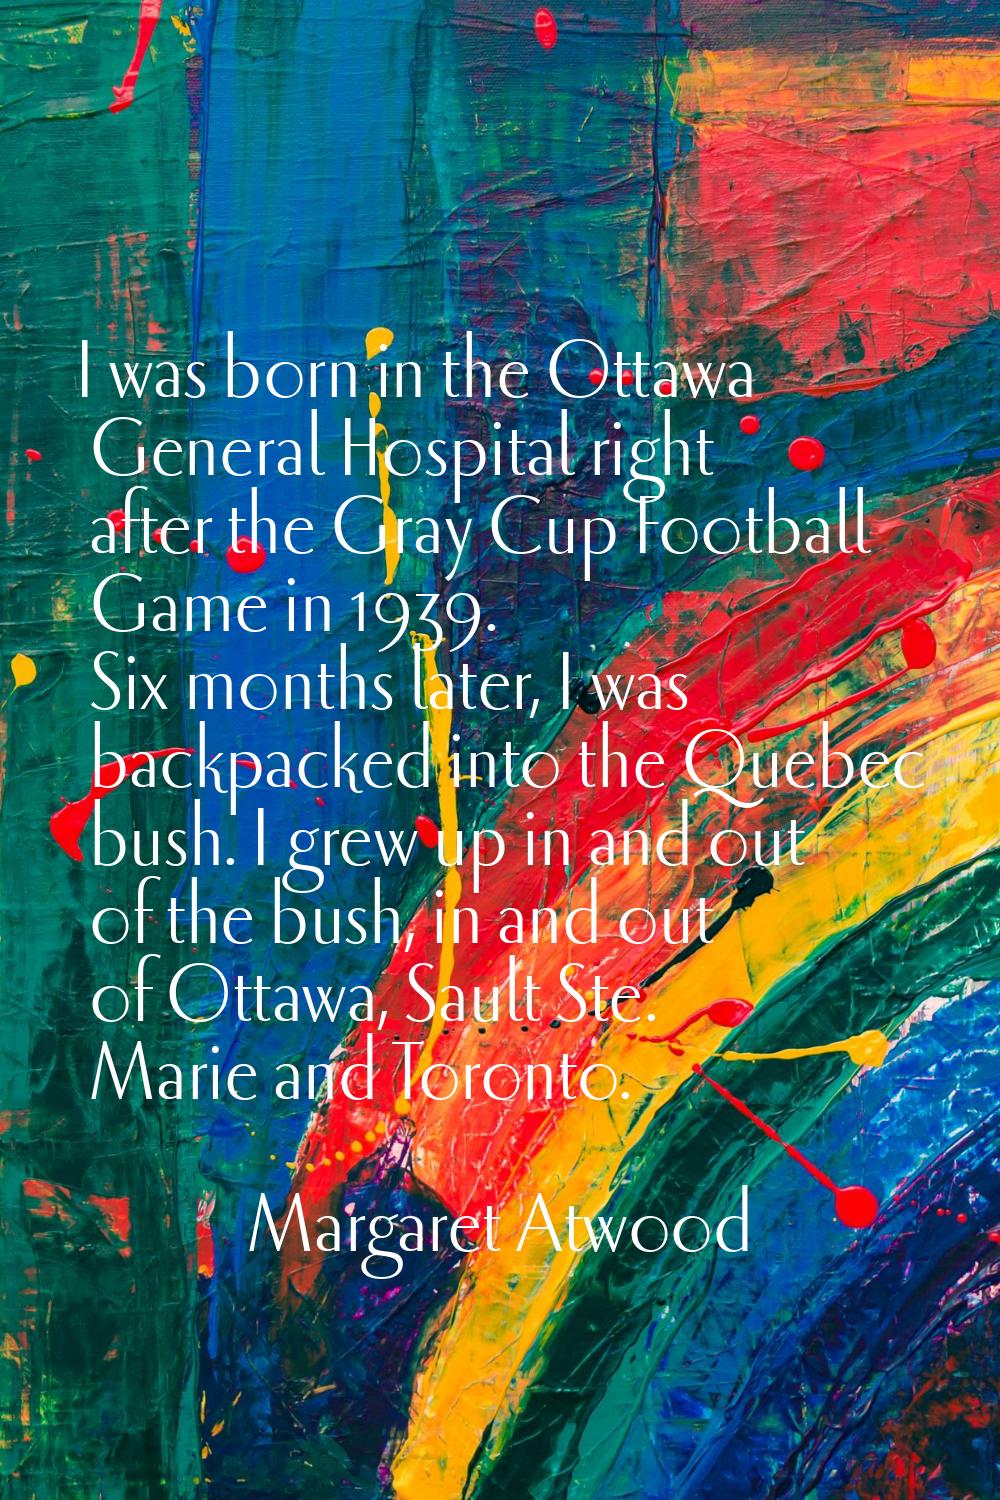 I was born in the Ottawa General Hospital right after the Gray Cup Football Game in 1939. Six month